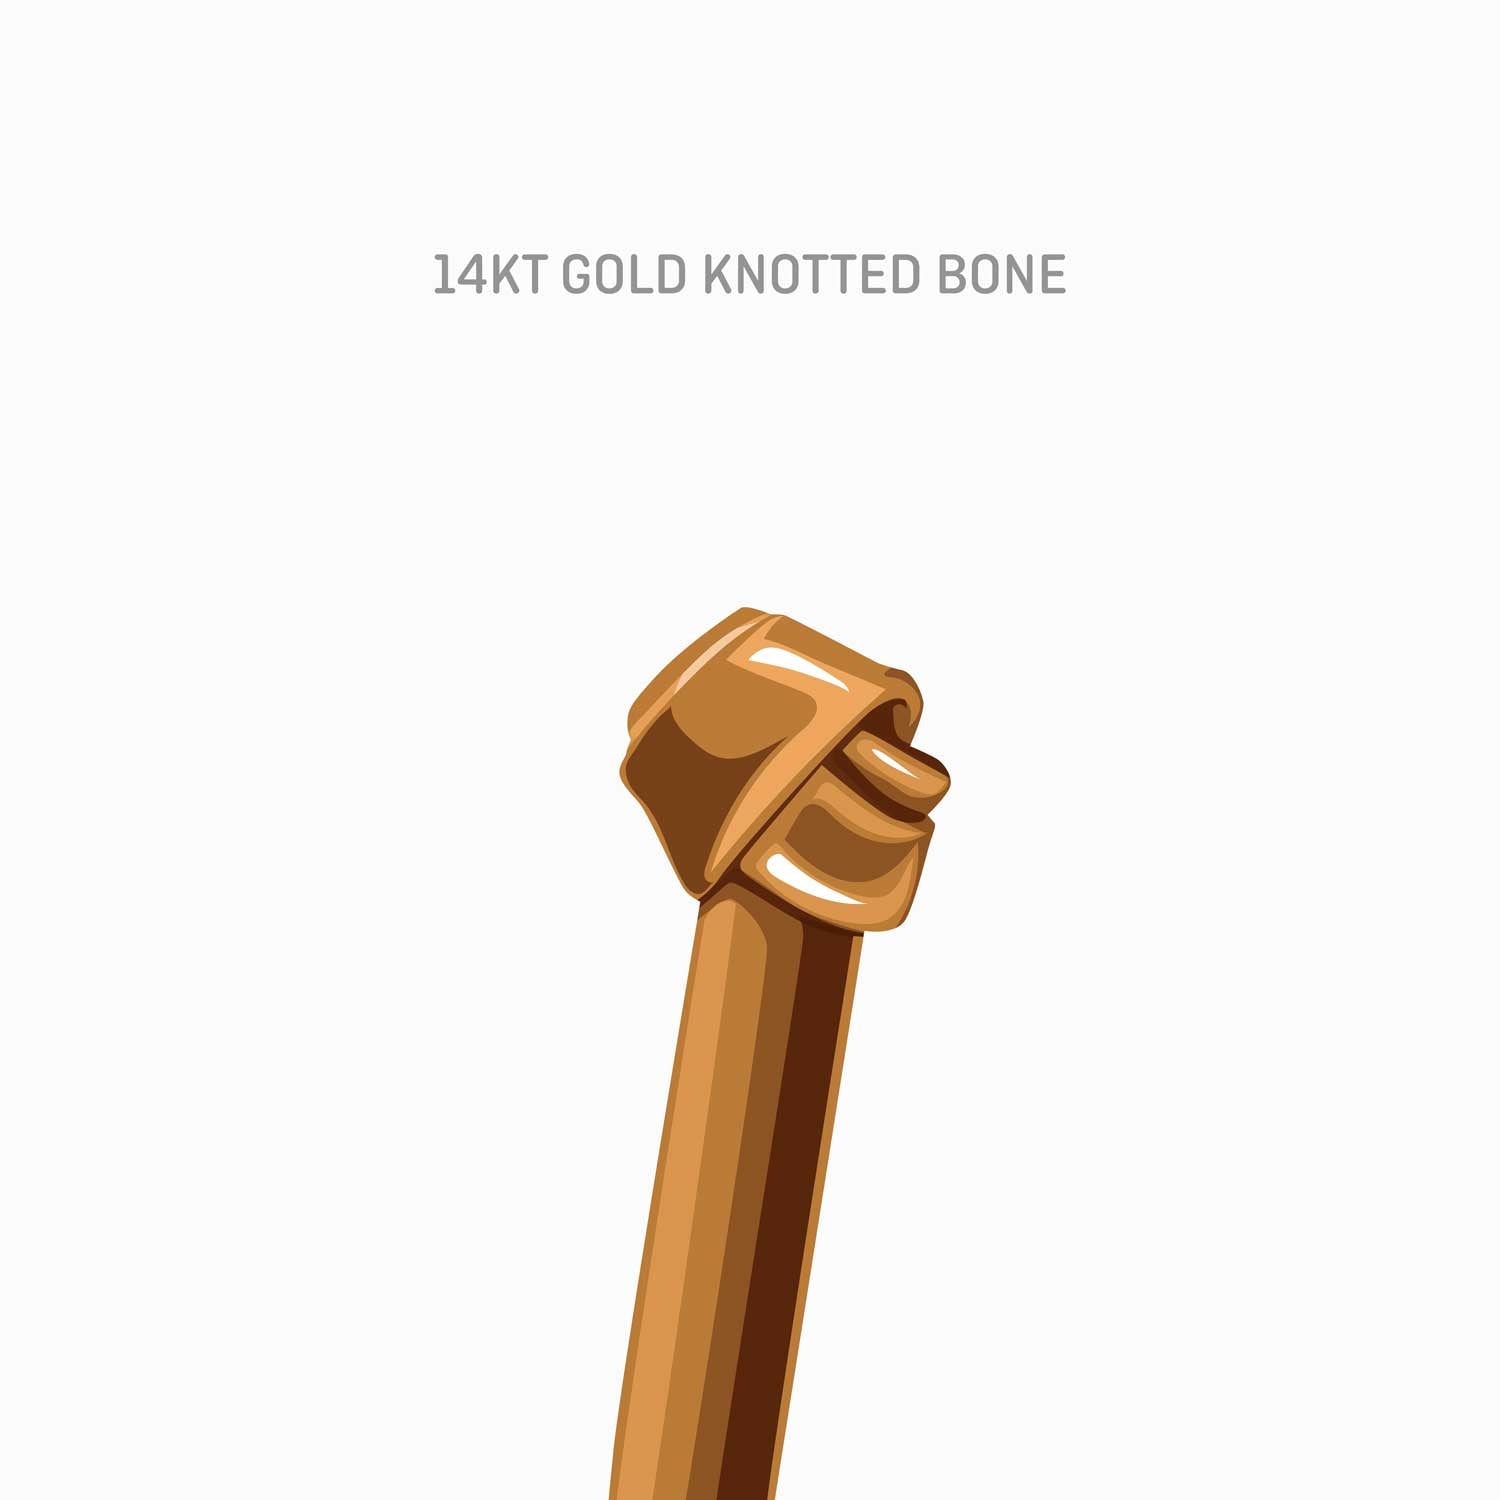 14kt gold knotted bone